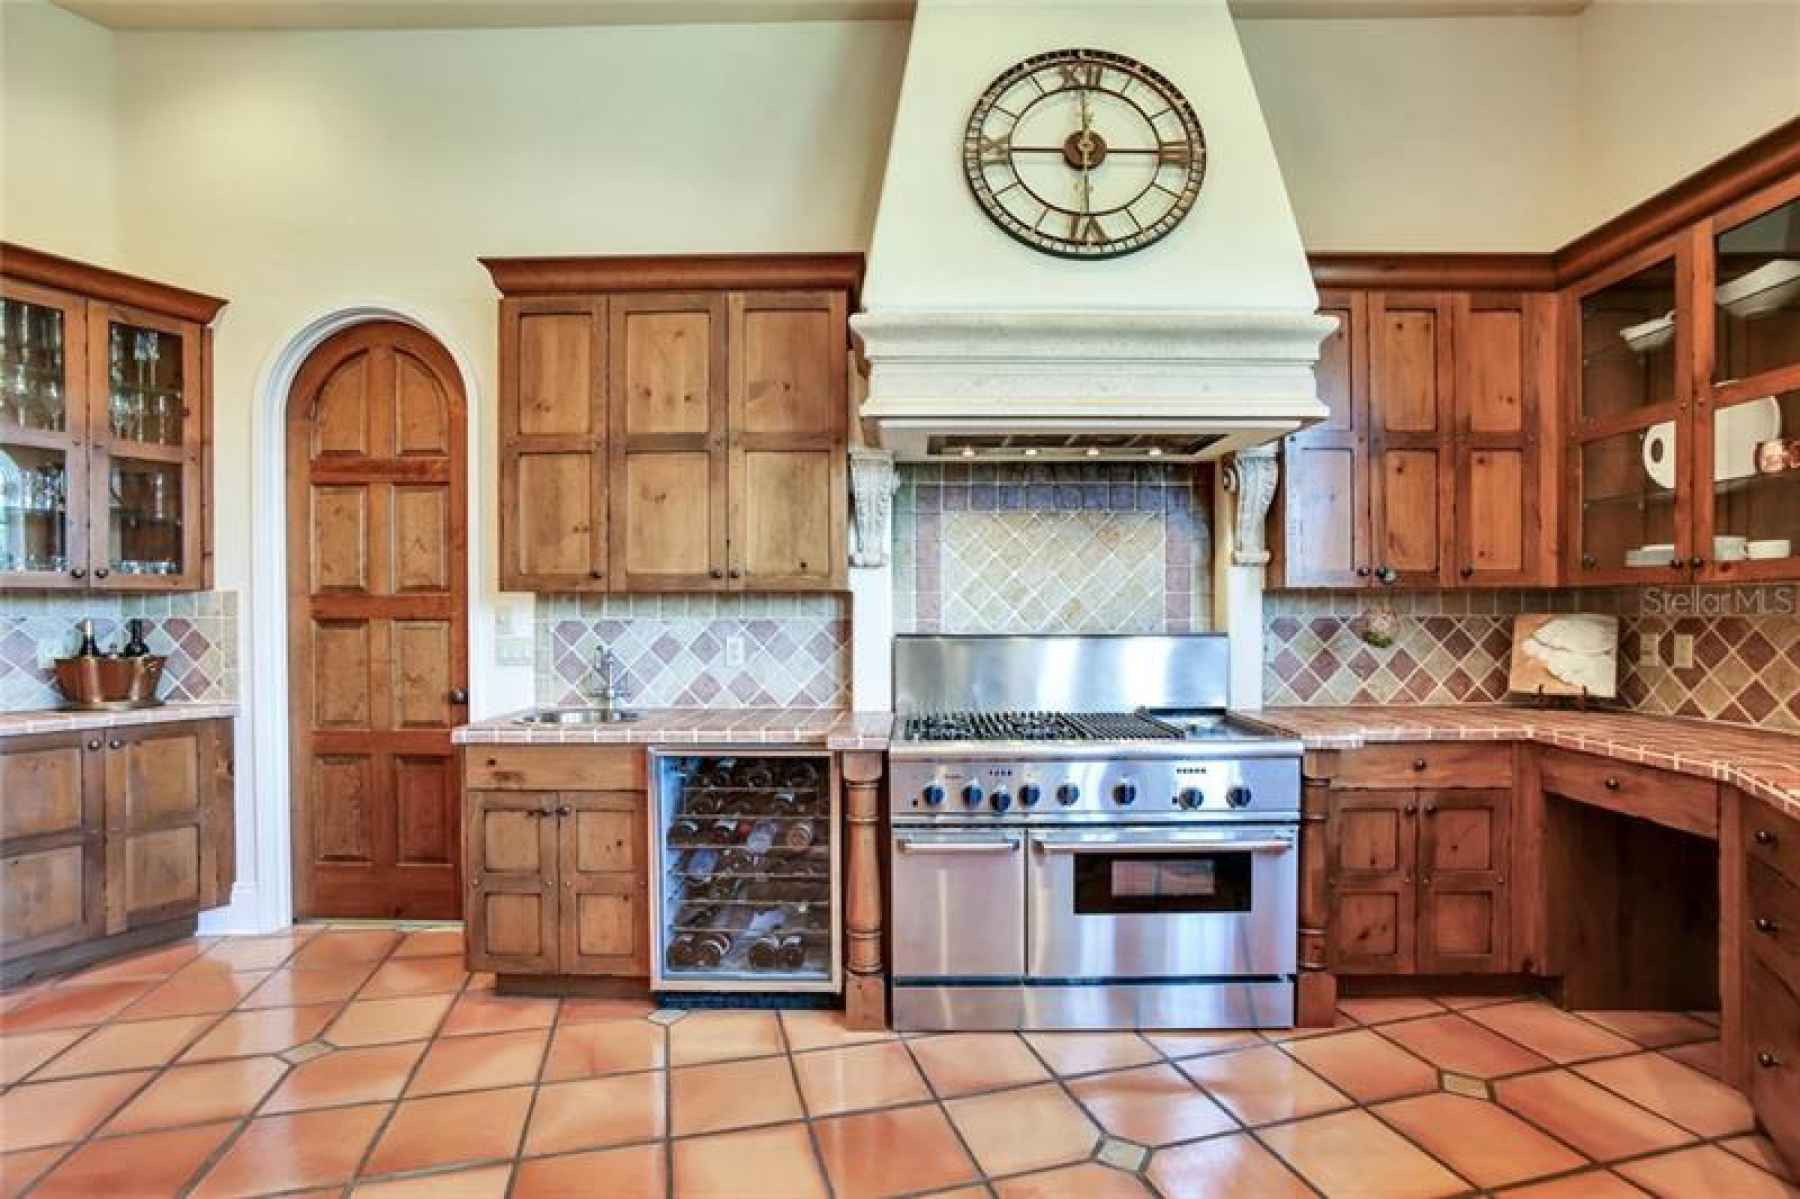 Kitchen with upscale appliances